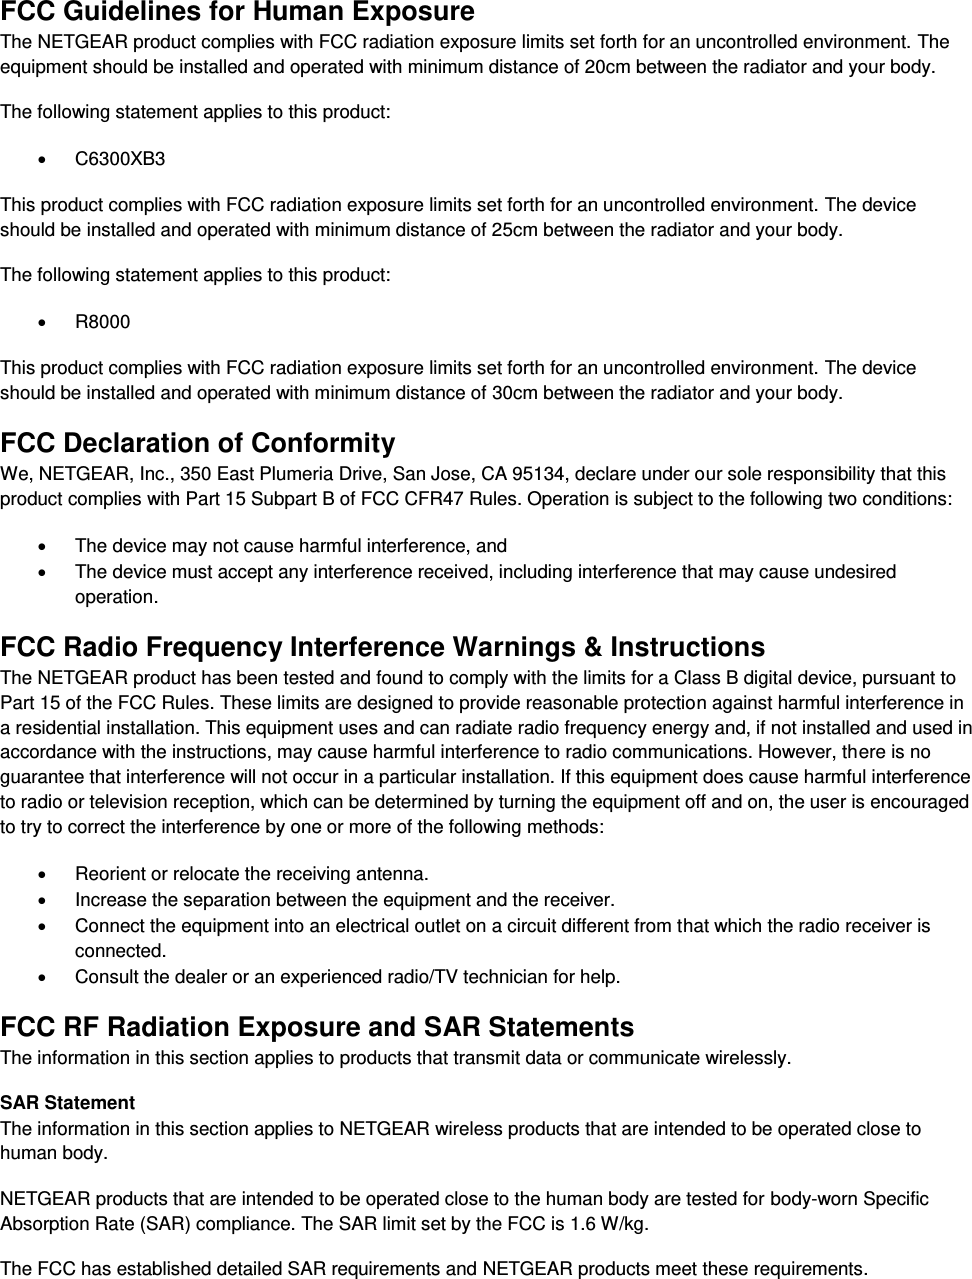  FCC Guidelines for Human Exposure The NETGEAR product complies with FCC radiation exposure limits set forth for an uncontrolled environment. The equipment should be installed and operated with minimum distance of 20cm between the radiator and your body. The following statement applies to this product:   C6300XB3 This product complies with FCC radiation exposure limits set forth for an uncontrolled environment. The device should be installed and operated with minimum distance of 25cm between the radiator and your body. The following statement applies to this product:   R8000 This product complies with FCC radiation exposure limits set forth for an uncontrolled environment. The device should be installed and operated with minimum distance of 30cm between the radiator and your body. FCC Declaration of Conformity We, NETGEAR, Inc., 350 East Plumeria Drive, San Jose, CA 95134, declare under our sole responsibility that this product complies with Part 15 Subpart B of FCC CFR47 Rules. Operation is subject to the following two conditions:   The device may not cause harmful interference, and   The device must accept any interference received, including interference that may cause undesired operation. FCC Radio Frequency Interference Warnings &amp; Instructions The NETGEAR product has been tested and found to comply with the limits for a Class B digital device, pursuant to Part 15 of the FCC Rules. These limits are designed to provide reasonable protection against harmful interference in a residential installation. This equipment uses and can radiate radio frequency energy and, if not installed and used in accordance with the instructions, may cause harmful interference to radio communications. However, there is no guarantee that interference will not occur in a particular installation. If this equipment does cause harmful interference to radio or television reception, which can be determined by turning the equipment off and on, the user is encouraged to try to correct the interference by one or more of the following methods:   Reorient or relocate the receiving antenna.   Increase the separation between the equipment and the receiver.   Connect the equipment into an electrical outlet on a circuit different from that which the radio receiver is connected.   Consult the dealer or an experienced radio/TV technician for help. FCC RF Radiation Exposure and SAR Statements The information in this section applies to products that transmit data or communicate wirelessly. SAR Statement The information in this section applies to NETGEAR wireless products that are intended to be operated close to human body.  NETGEAR products that are intended to be operated close to the human body are tested for body-worn Specific Absorption Rate (SAR) compliance. The SAR limit set by the FCC is 1.6 W/kg. The FCC has established detailed SAR requirements and NETGEAR products meet these requirements. 